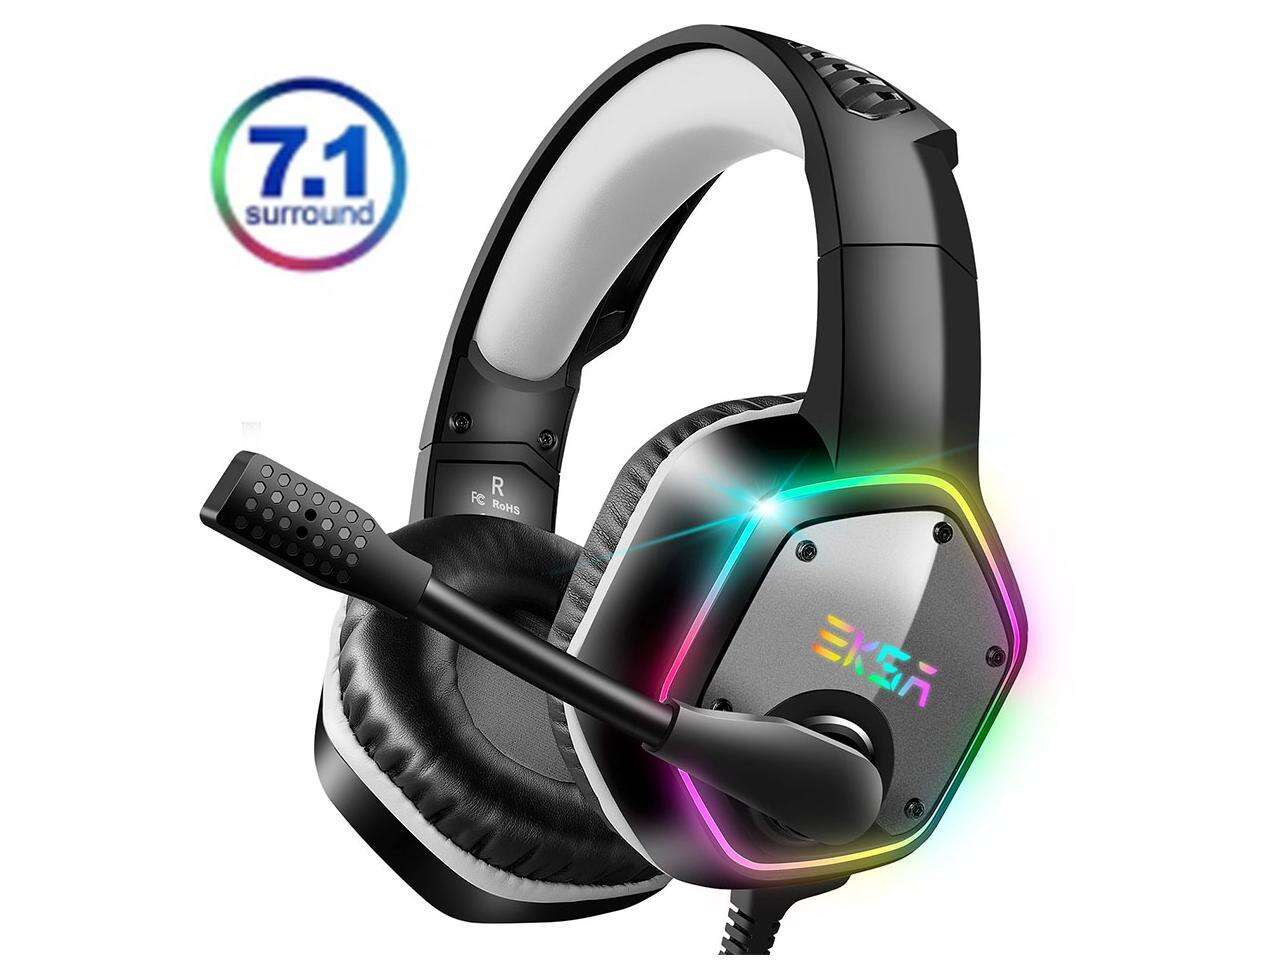 EKSA E1000 Gaming Headset 7.1 Virtual Surround Gaming Headphones Wired USB Earphone With LED RGB Light Mic For Computer/PC/PS4 Gray/Green